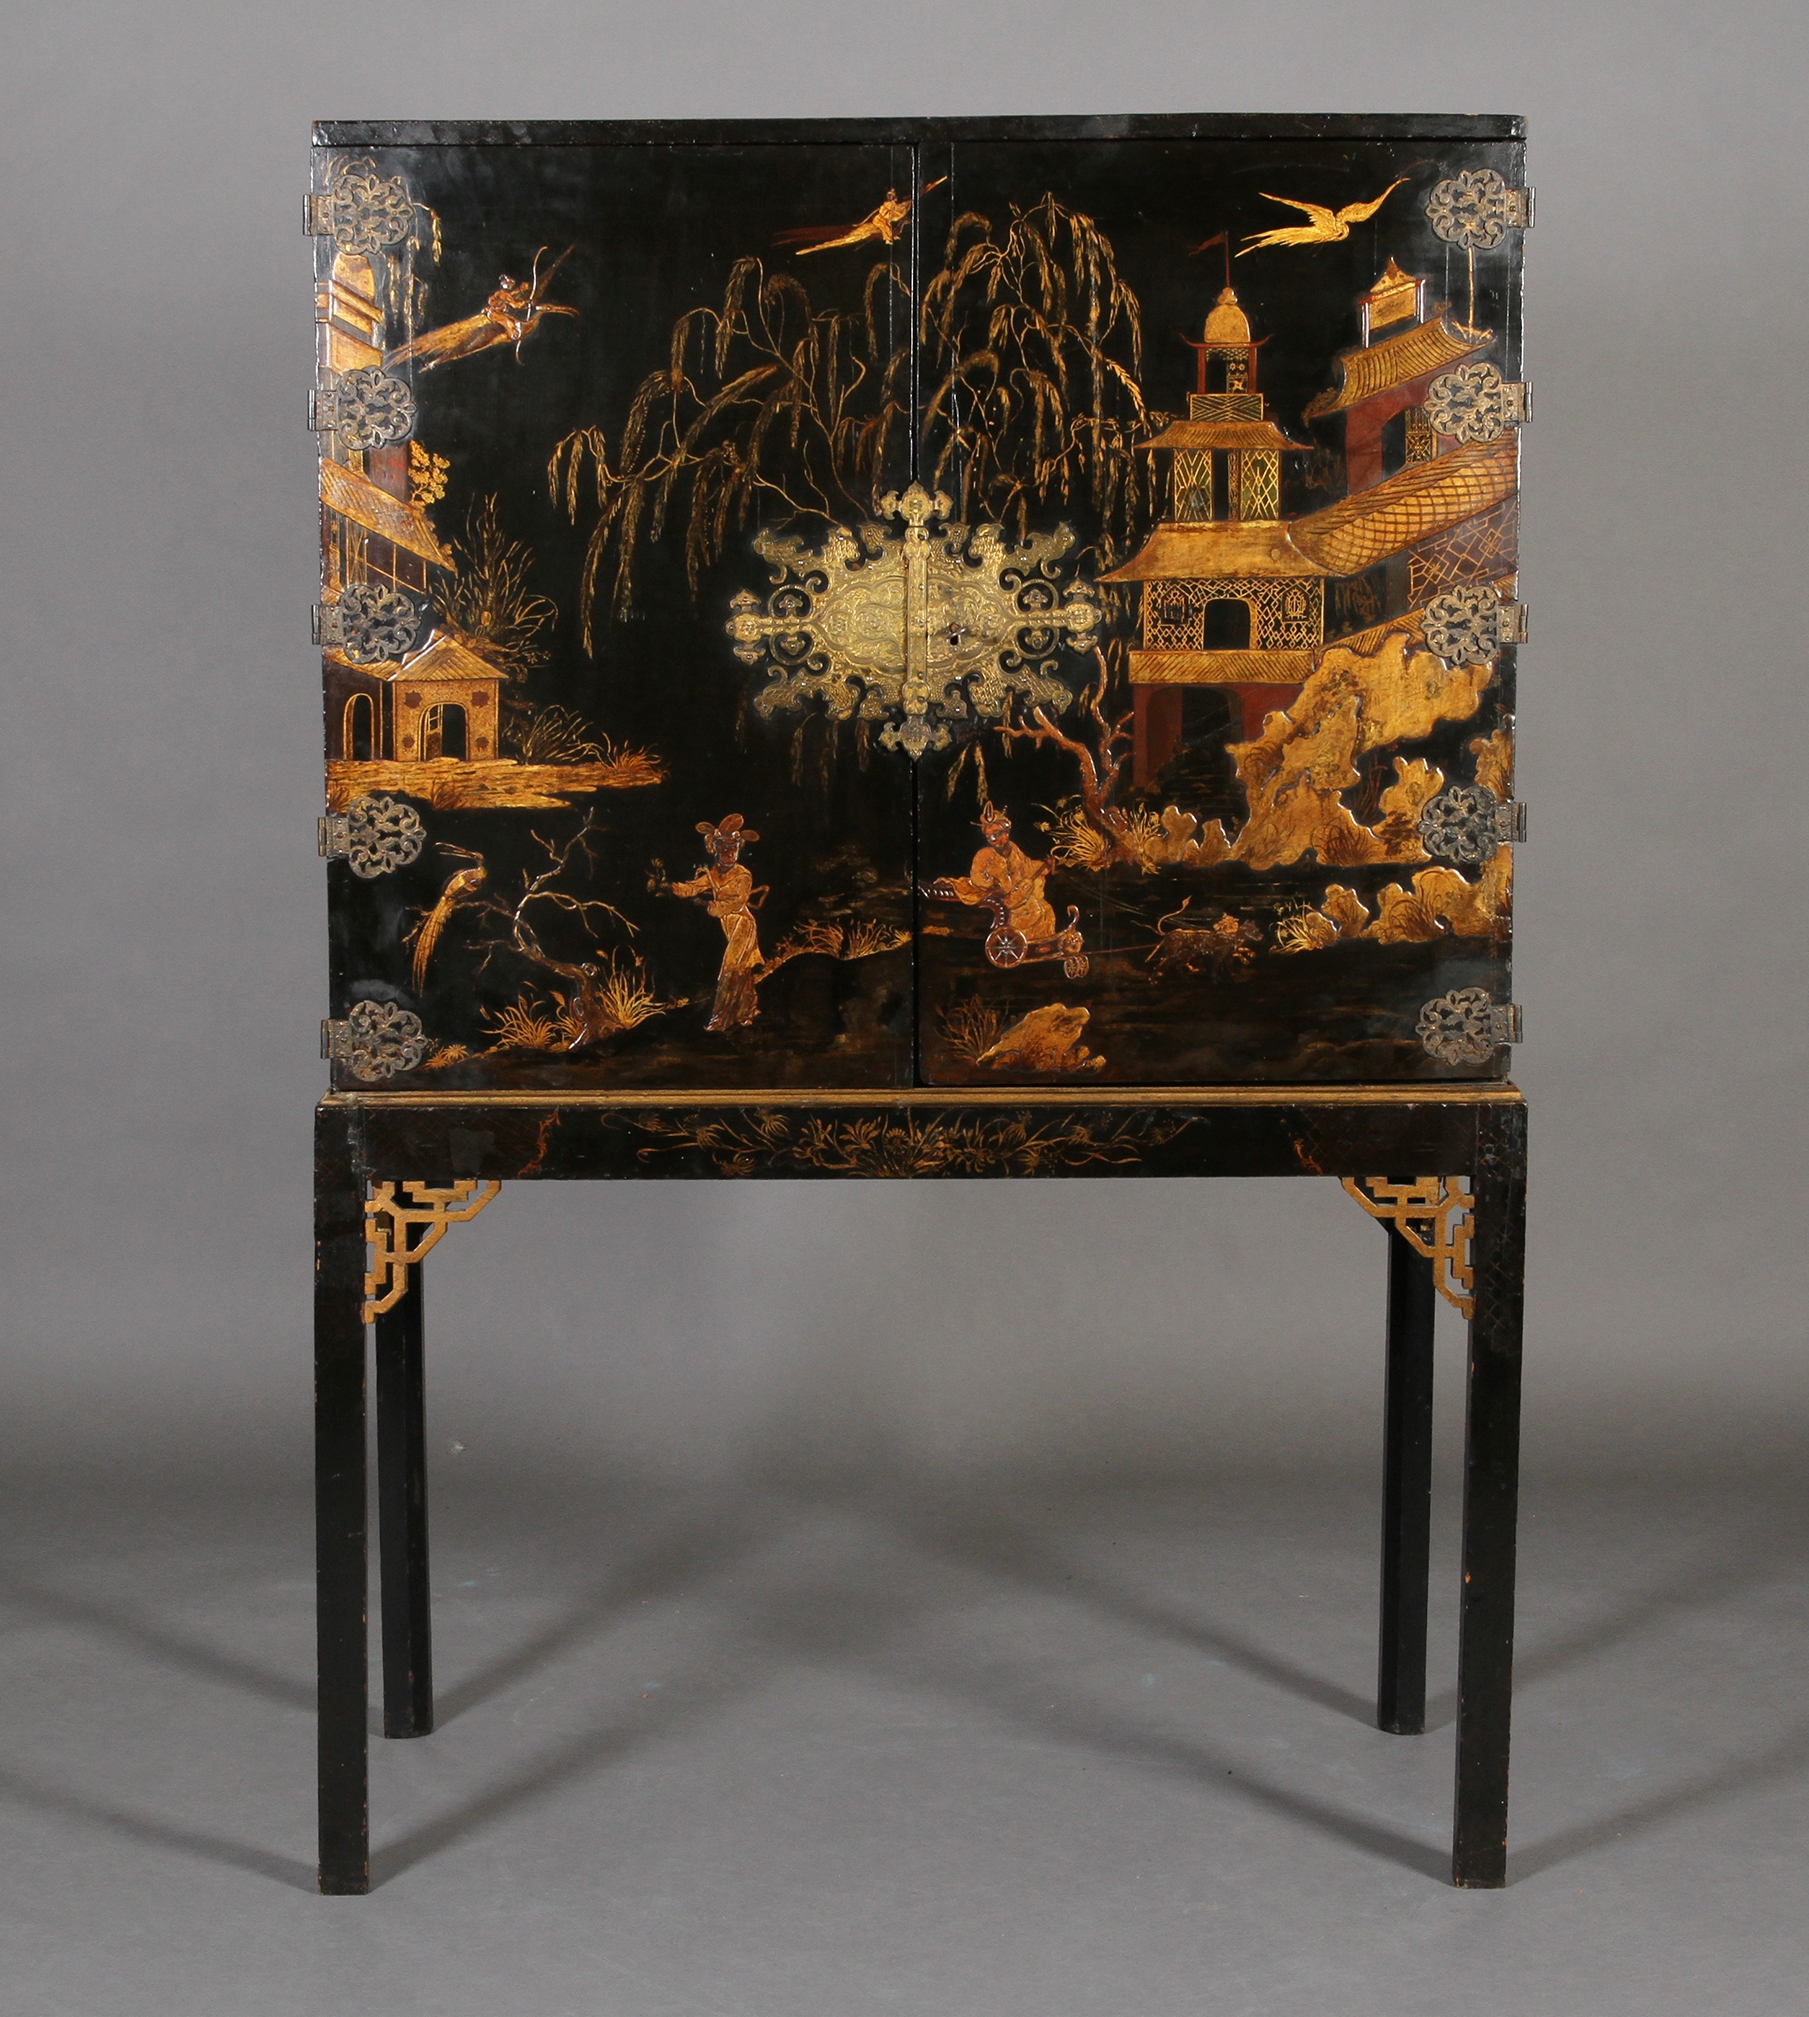 A CHINESE BLACK AND GILT LACQUERED CABINET ON STAND, 19th century, having two doors gilt with